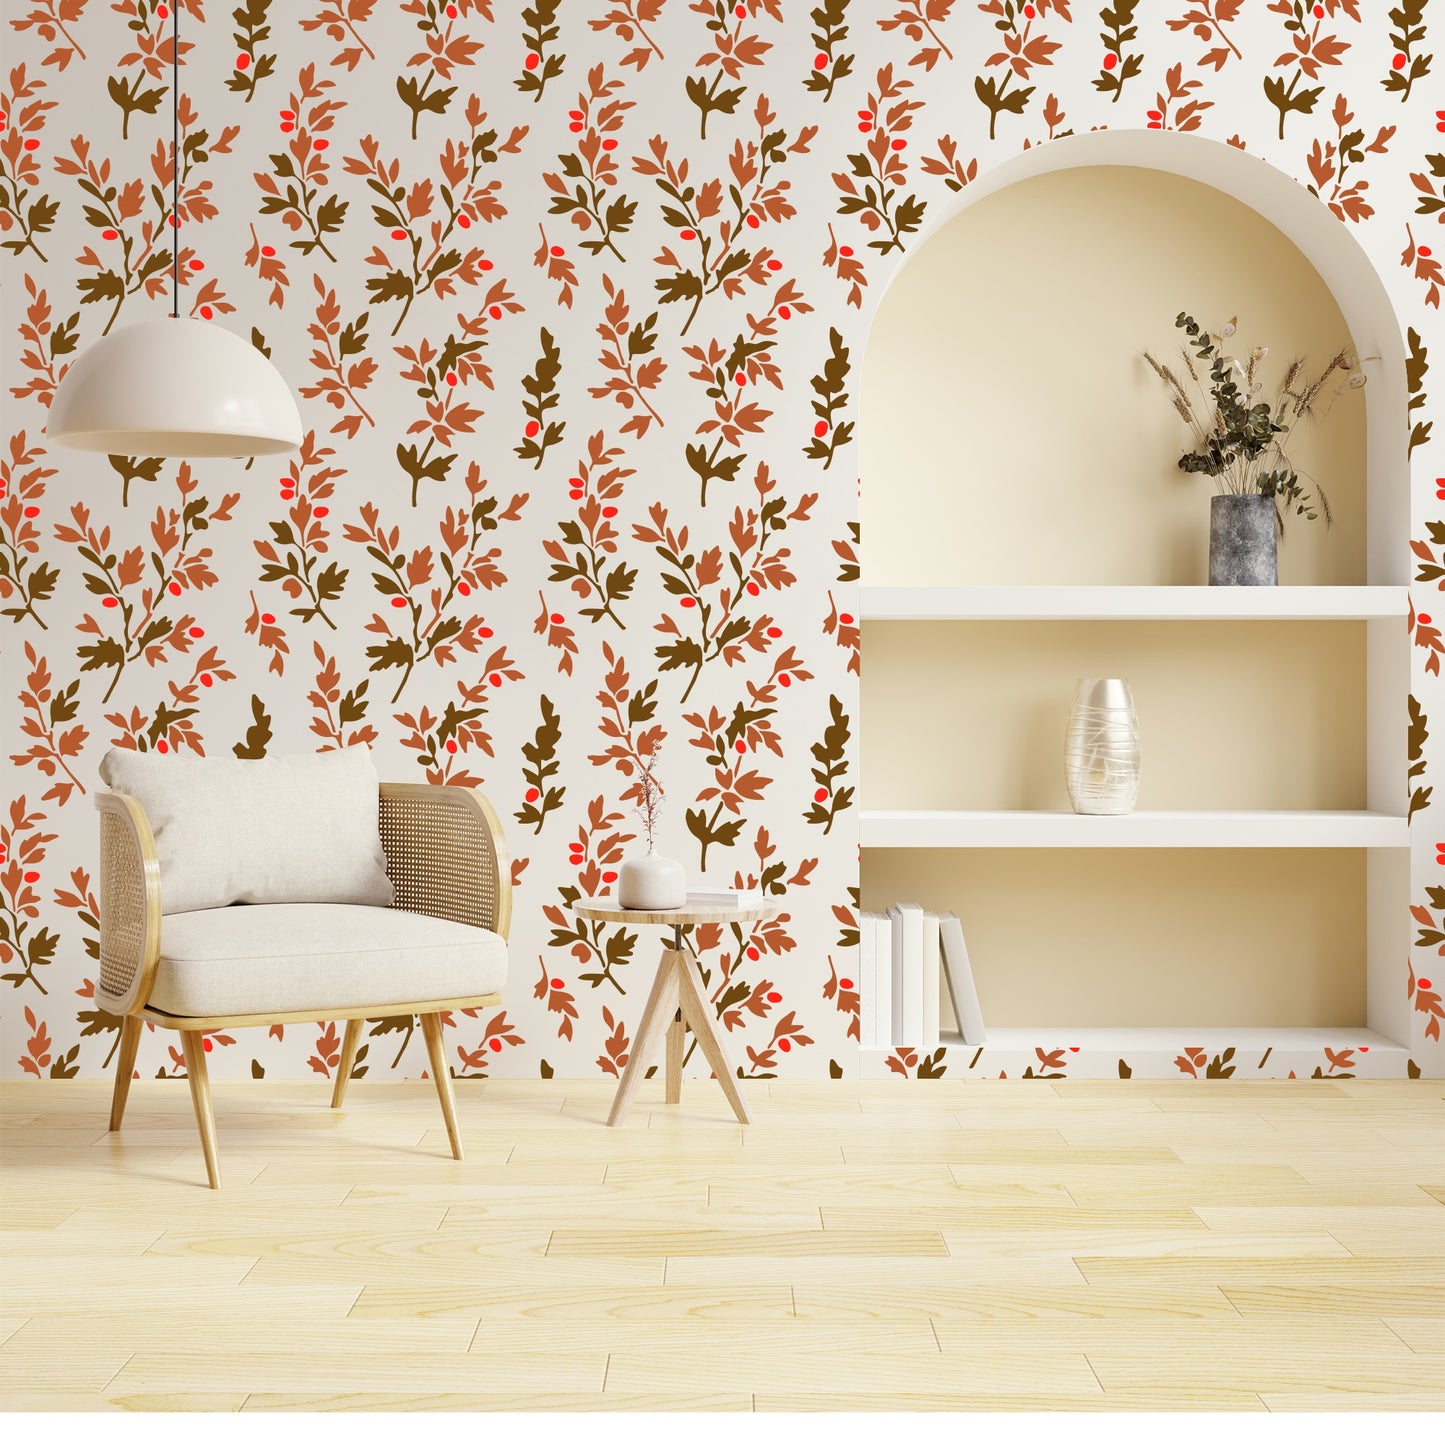 Berry Branches Design New Stencil for Wall Painting (KDMD1451)